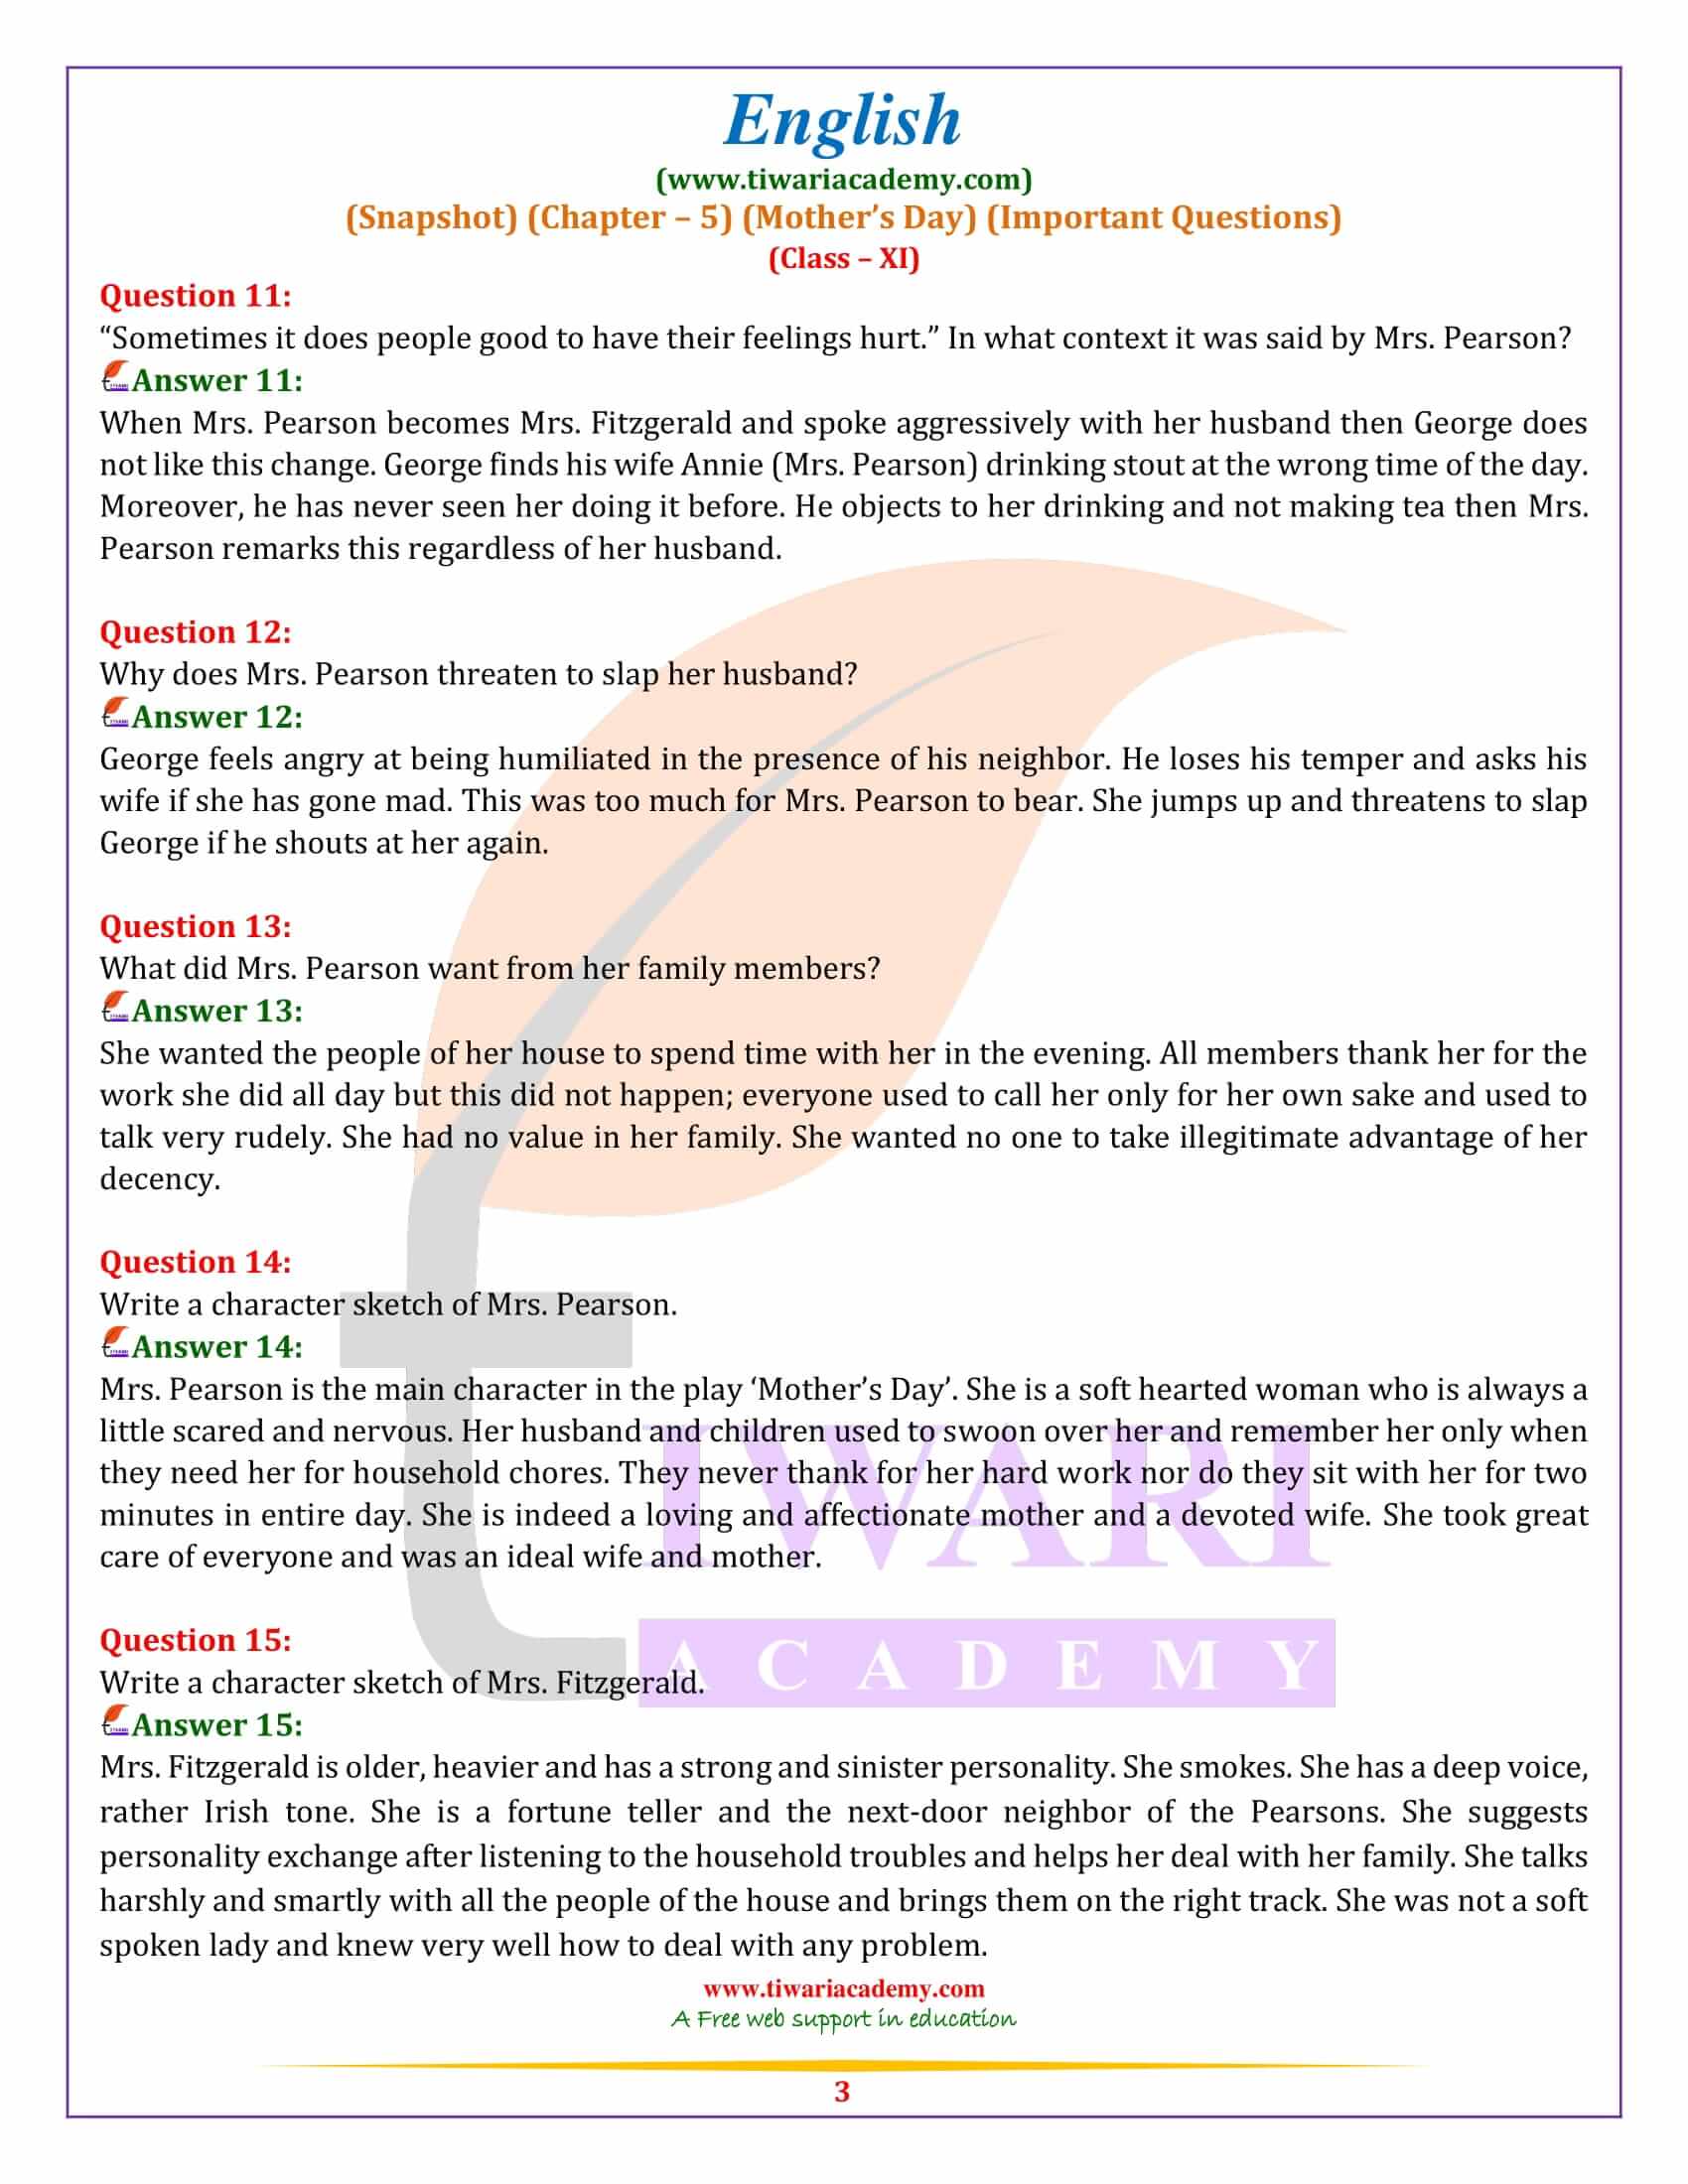 Class 11 English Snapshots Chapter 5 Practice Questions